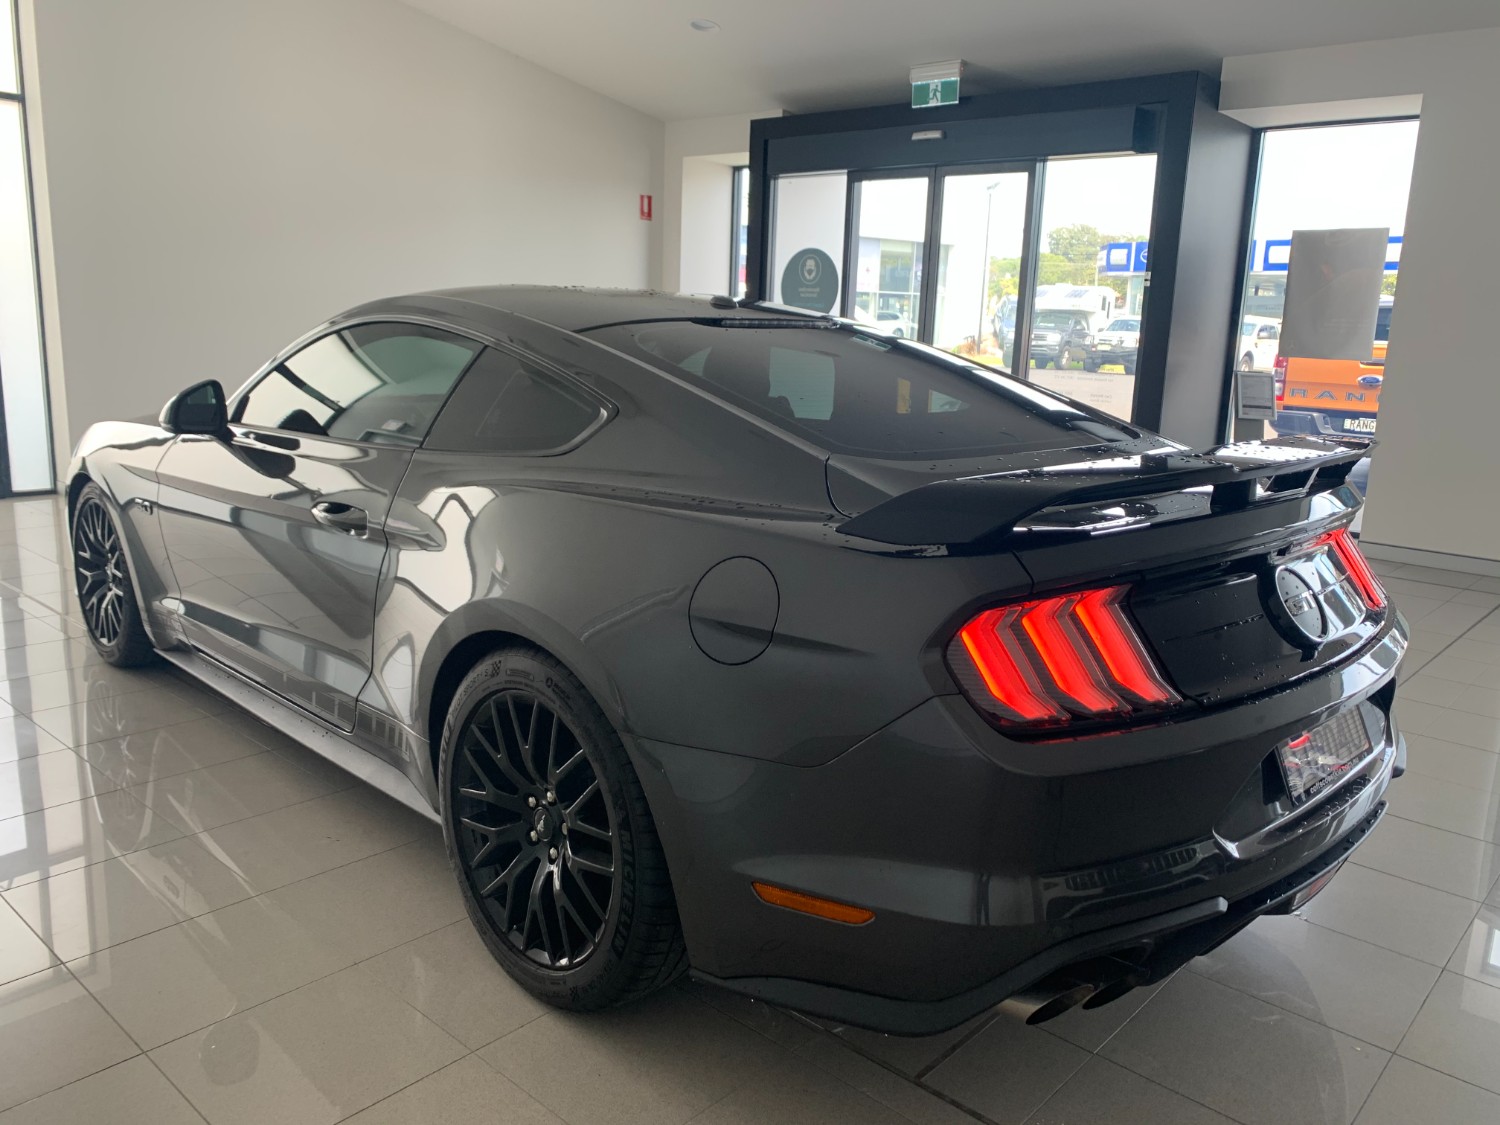 2019 Ford Mustang FN GT Fastback Coupe Image 7